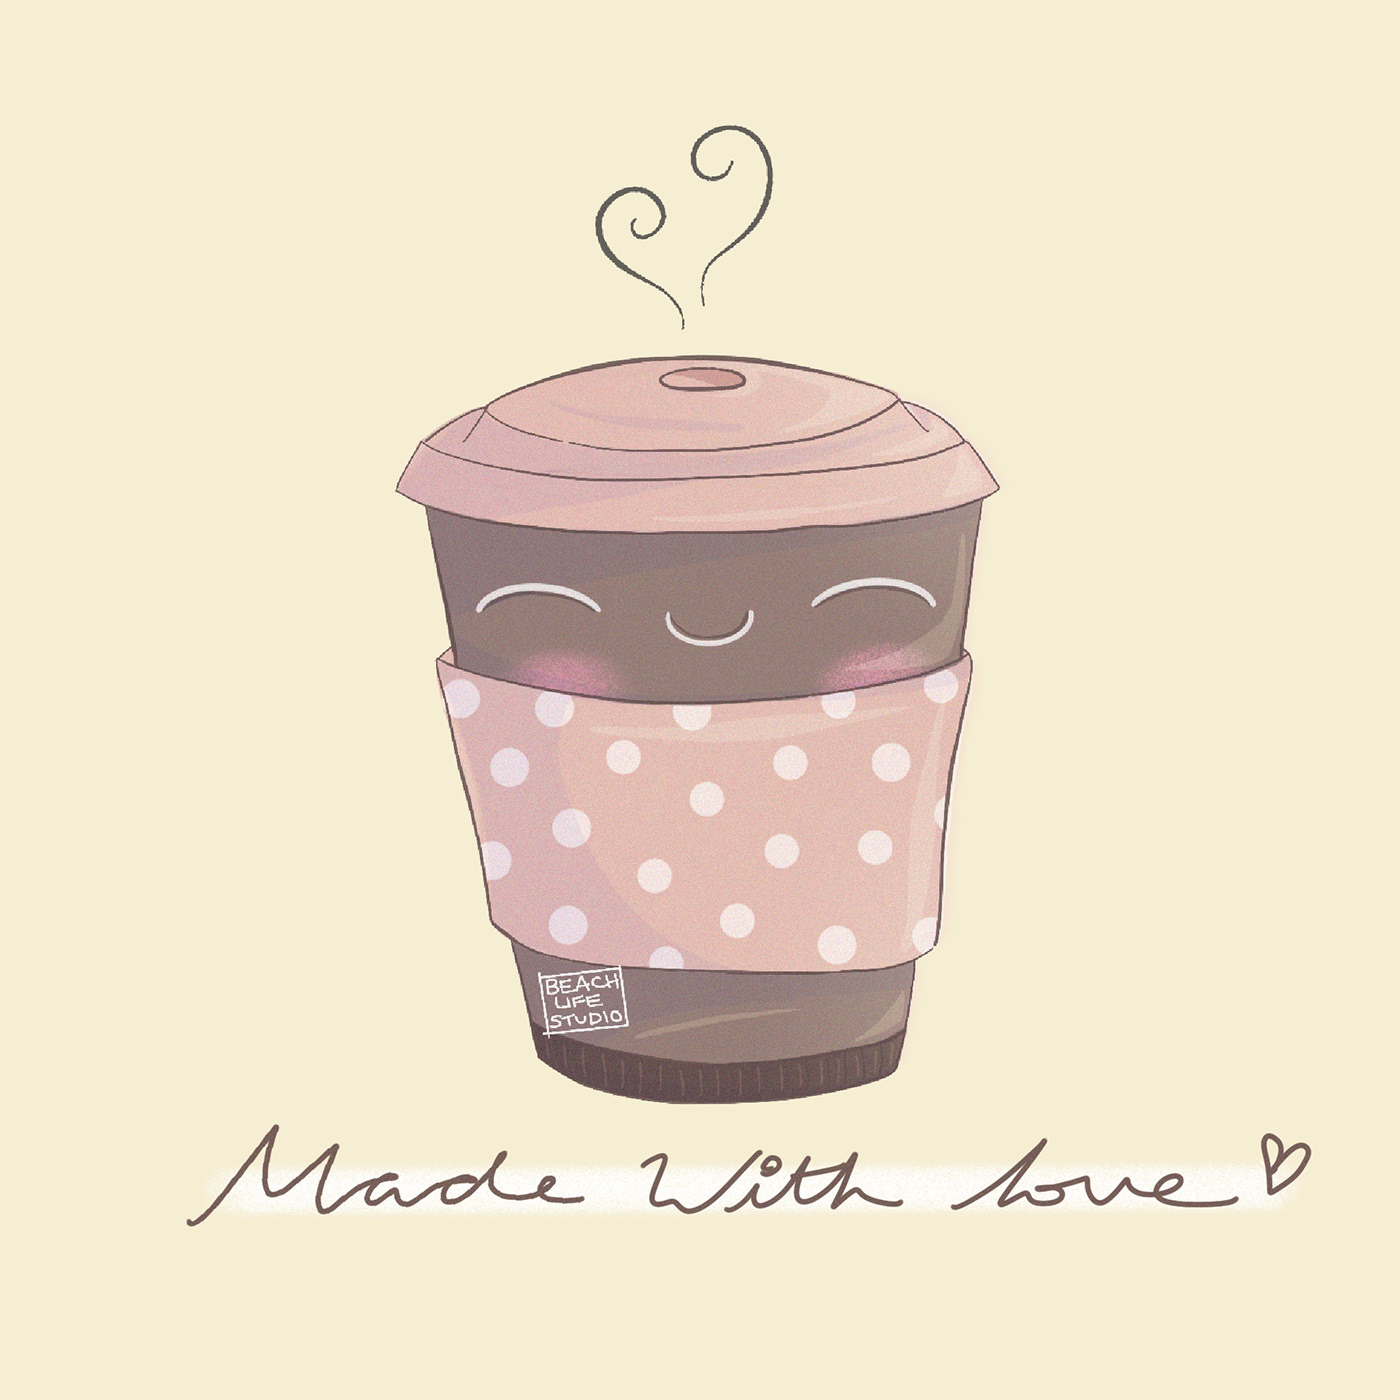 Coffee happy Made With Love coffee cup cute characters childrens illustration characters